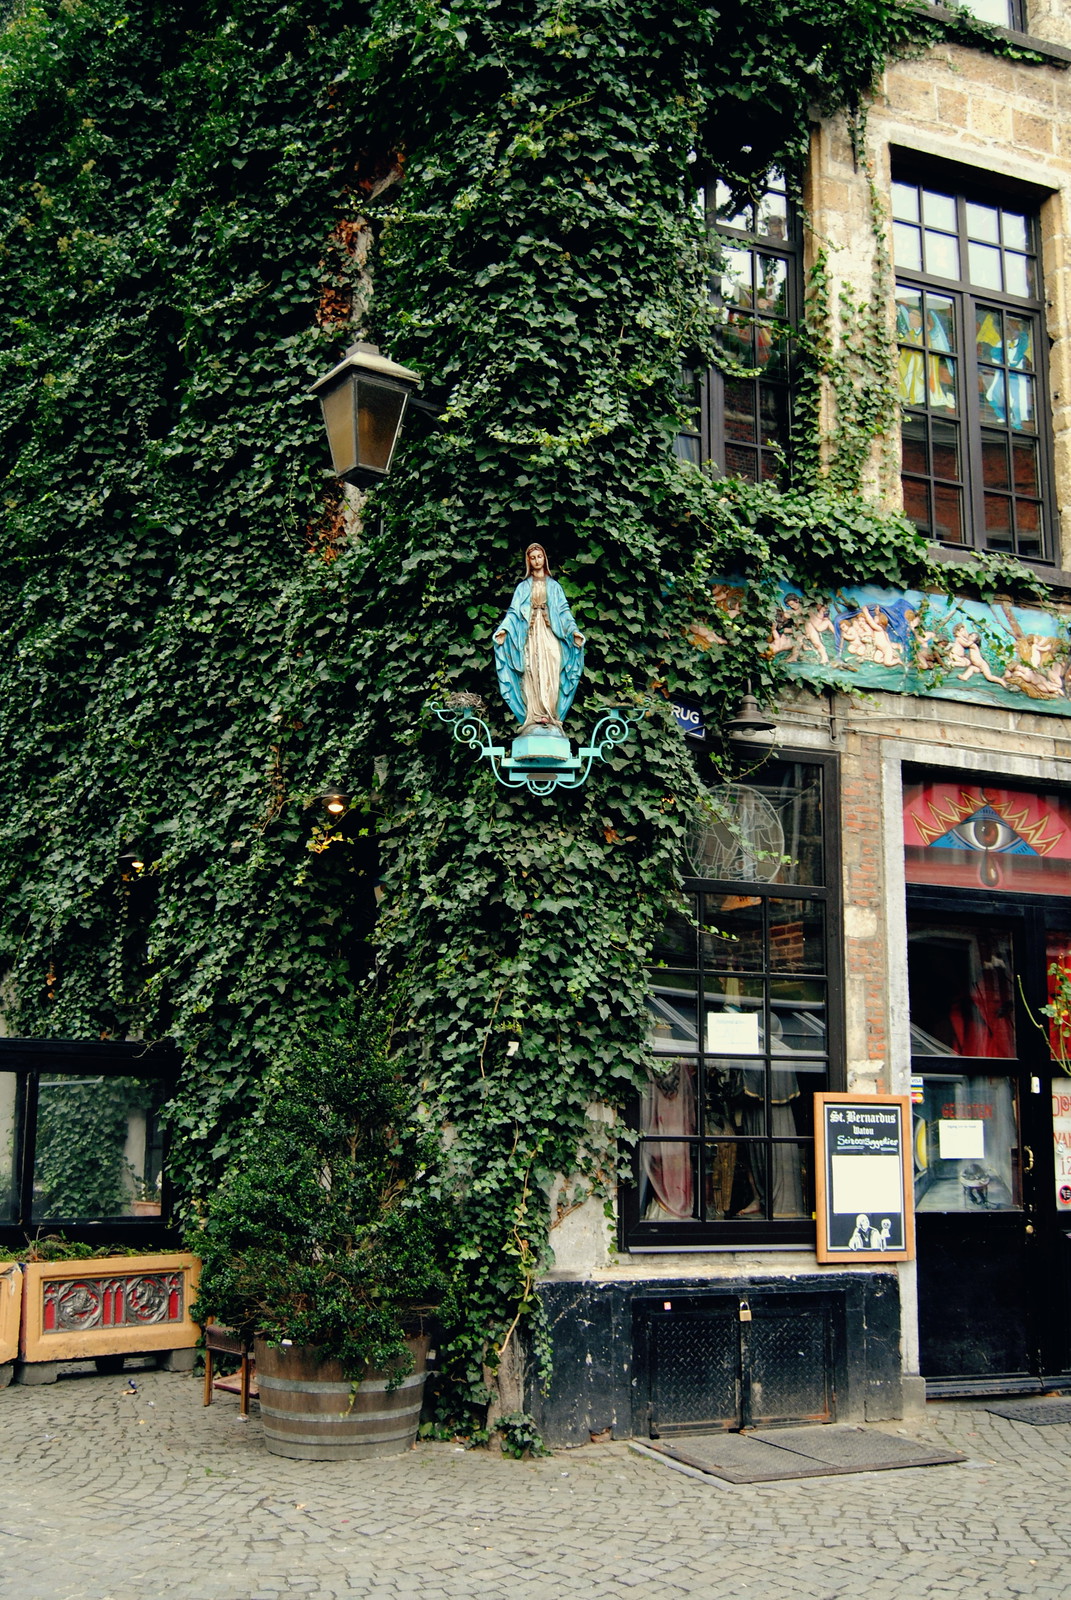 A small statue of the Virgin Mary in the streets of Antwerp.